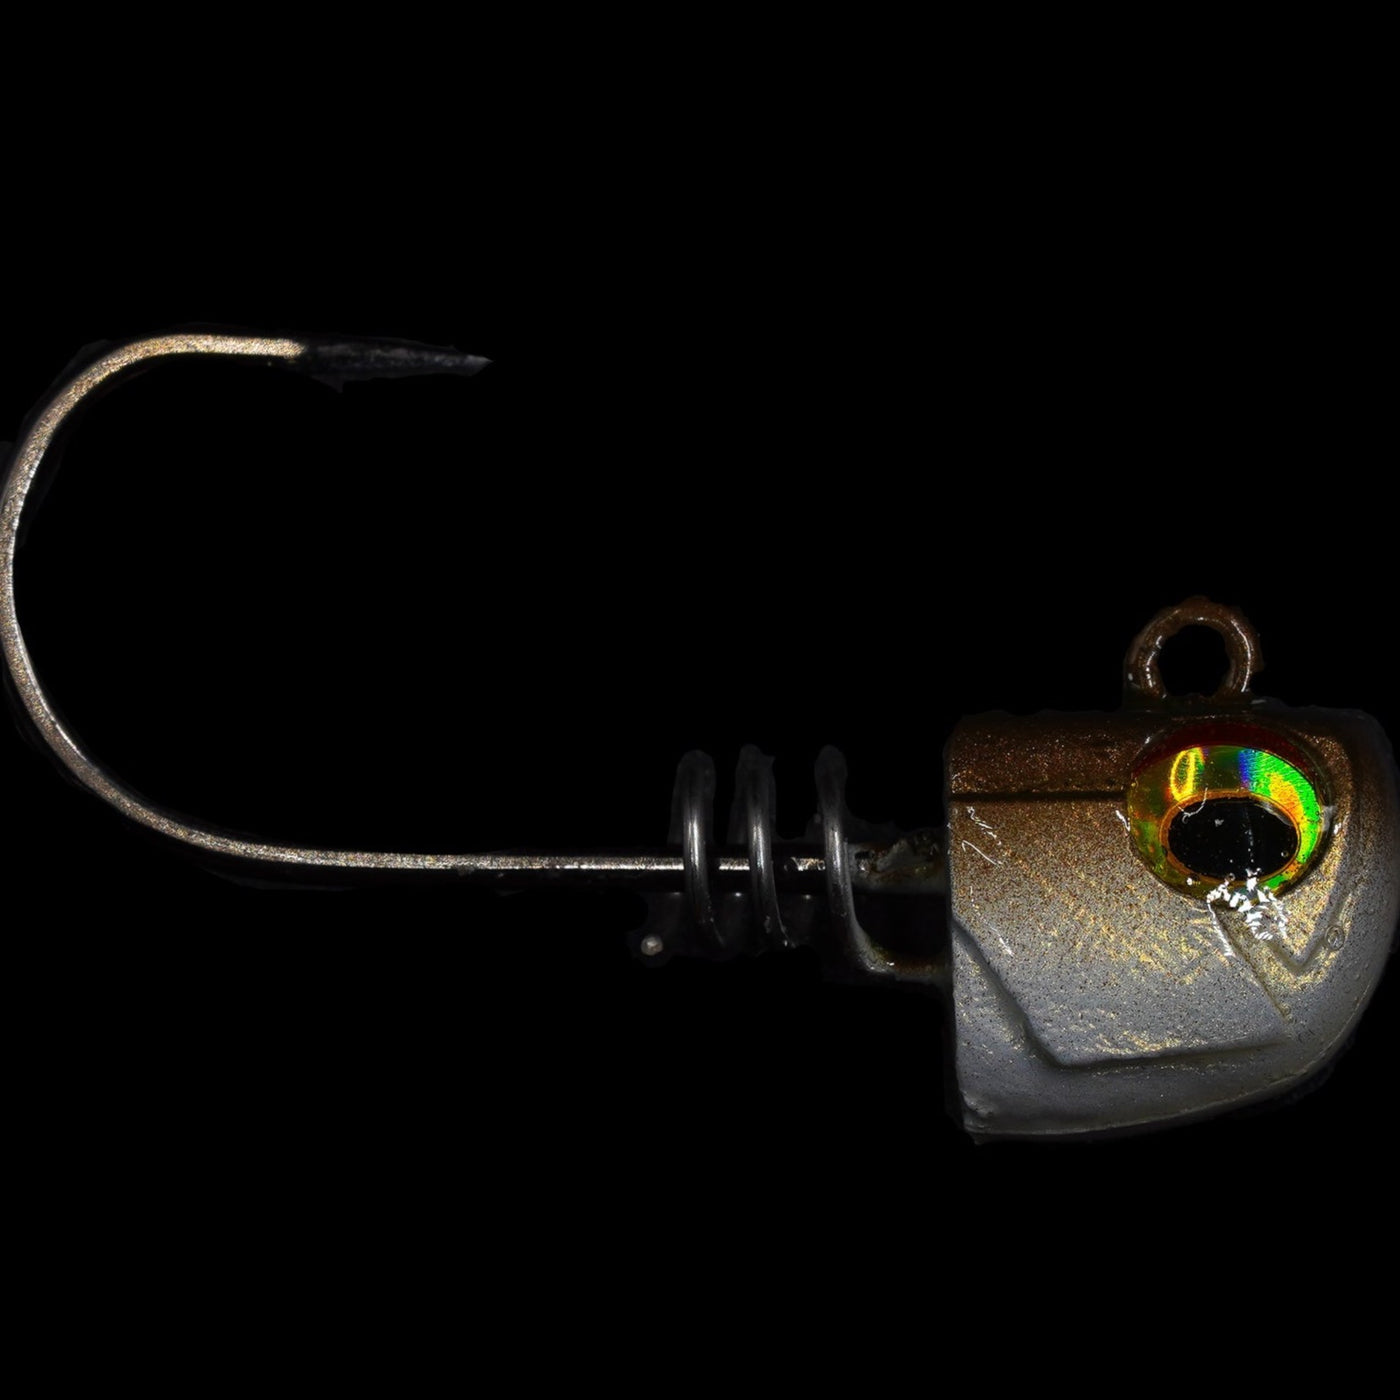 Jig Heads for 3" bait - No Live Bait Needed Jig heads3 17